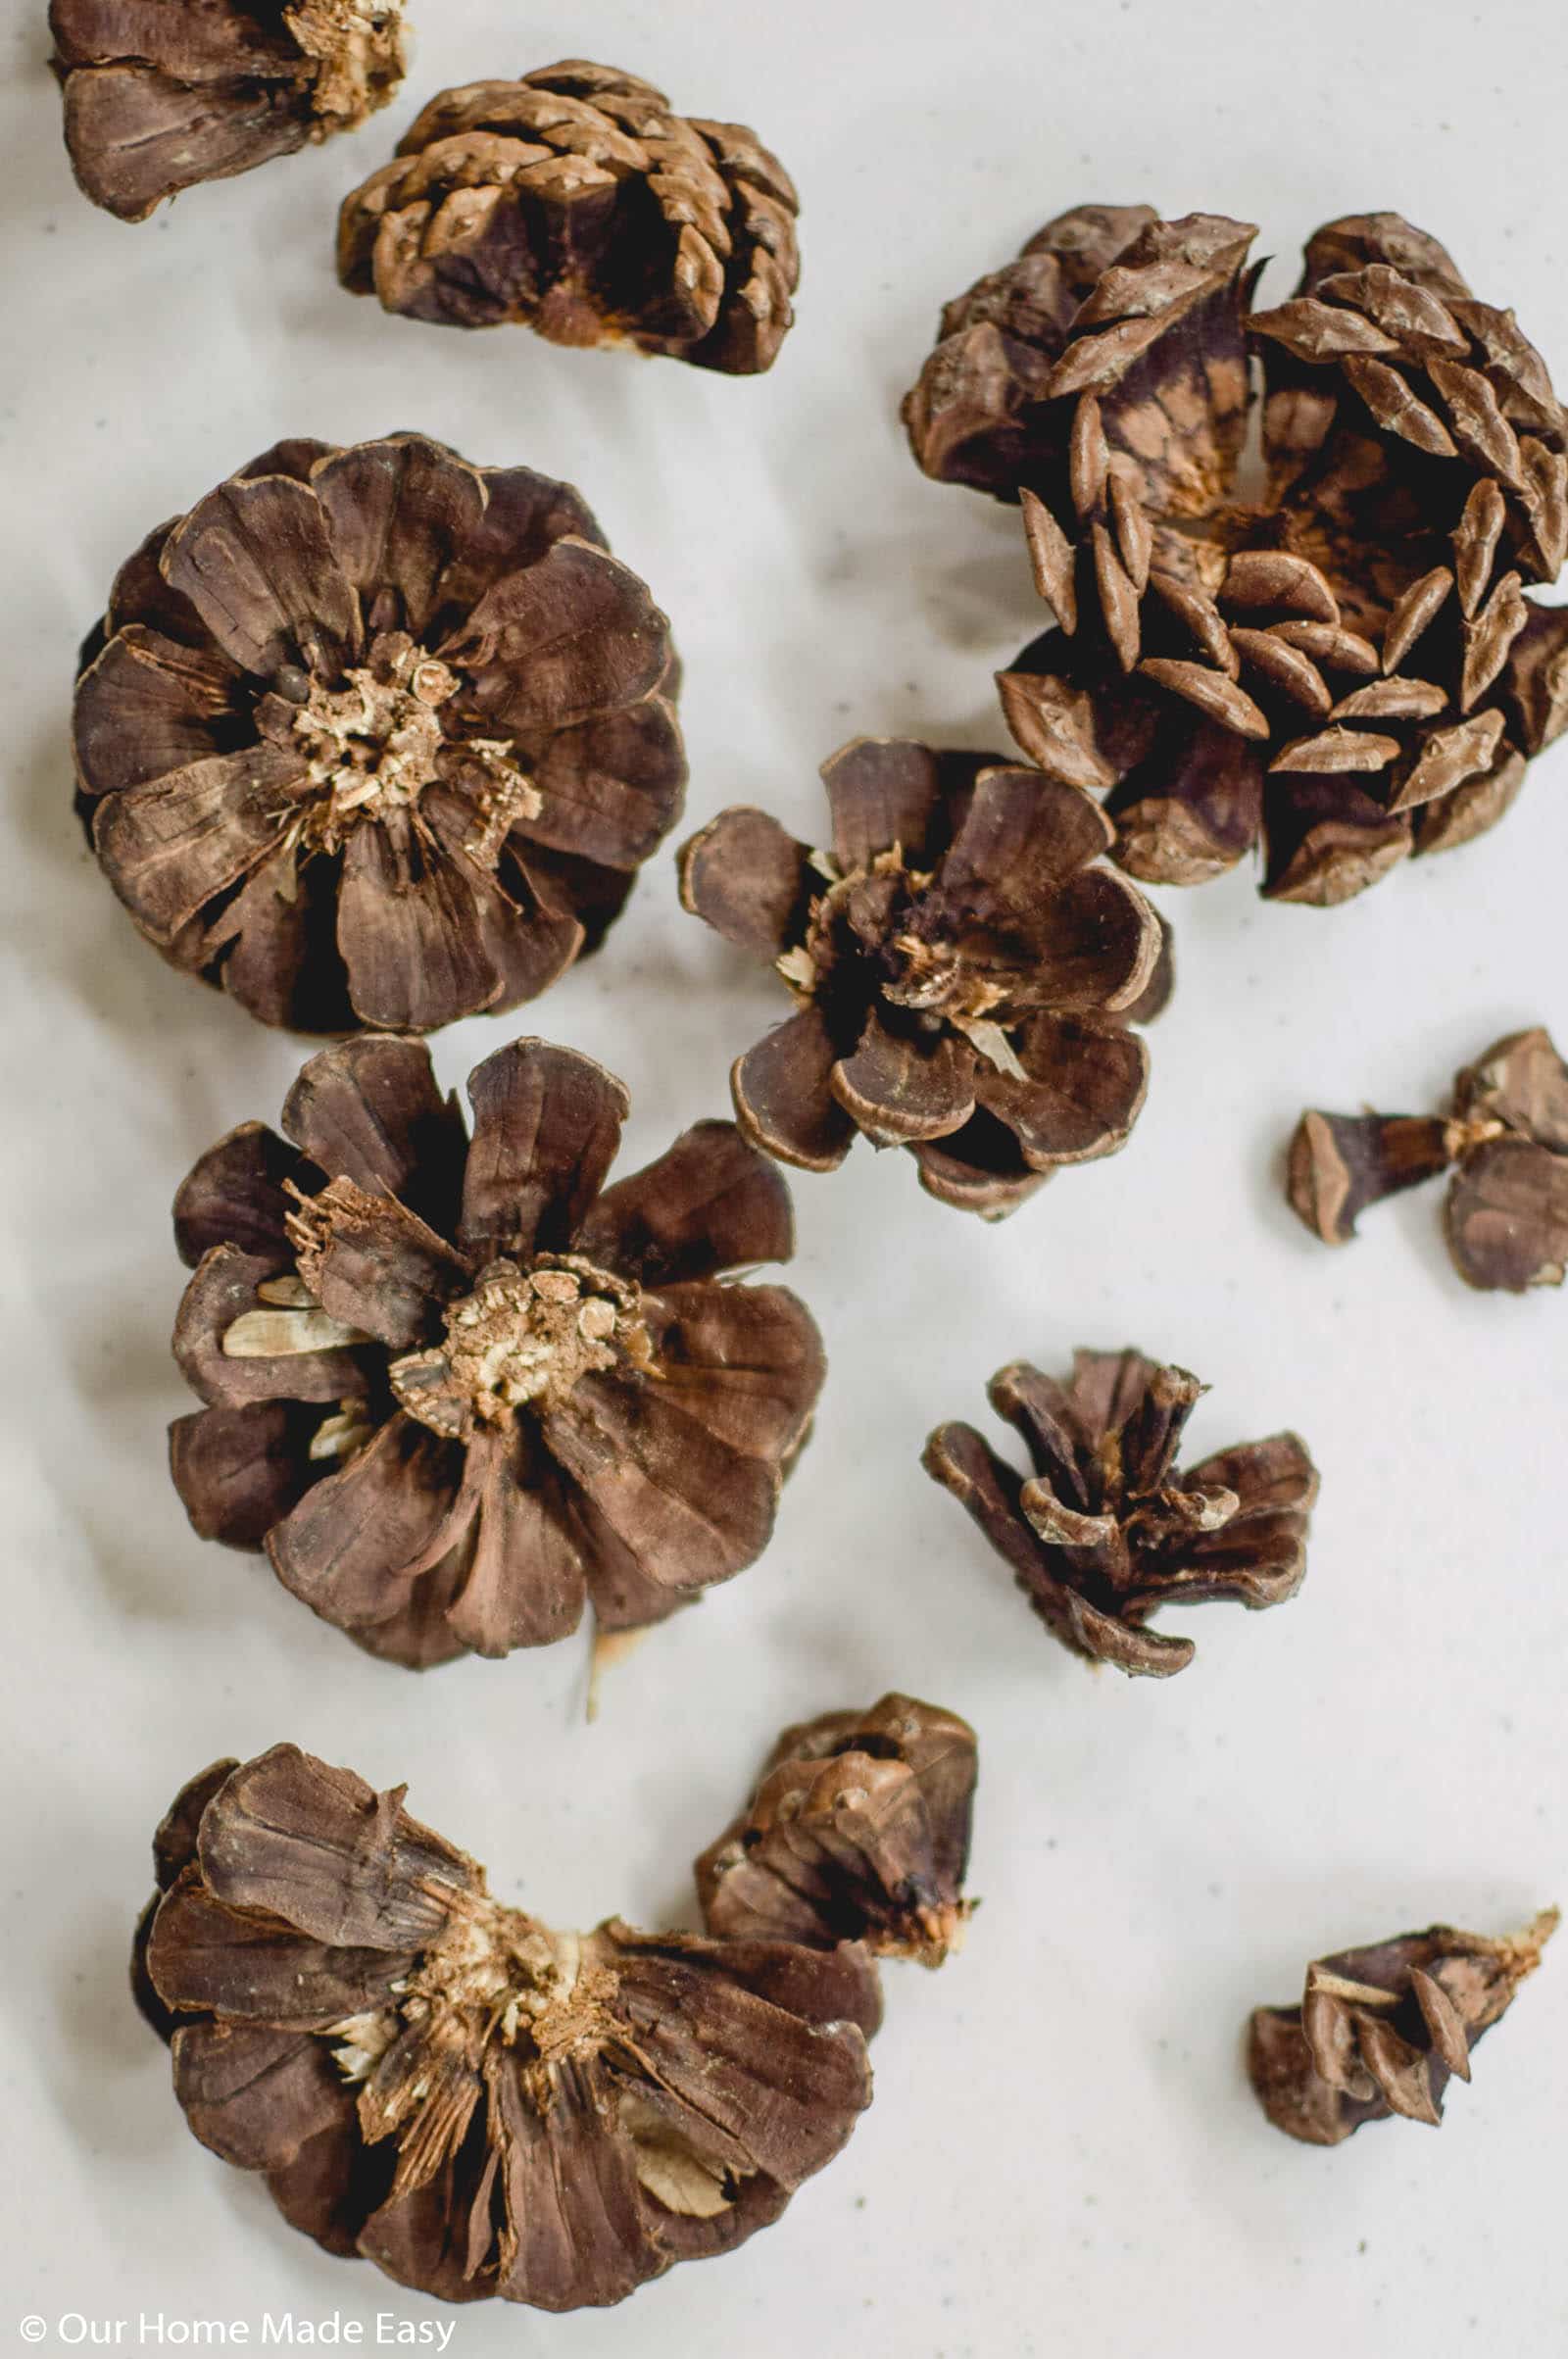 Pinecone slices look like wooden flowers when cut into pieces